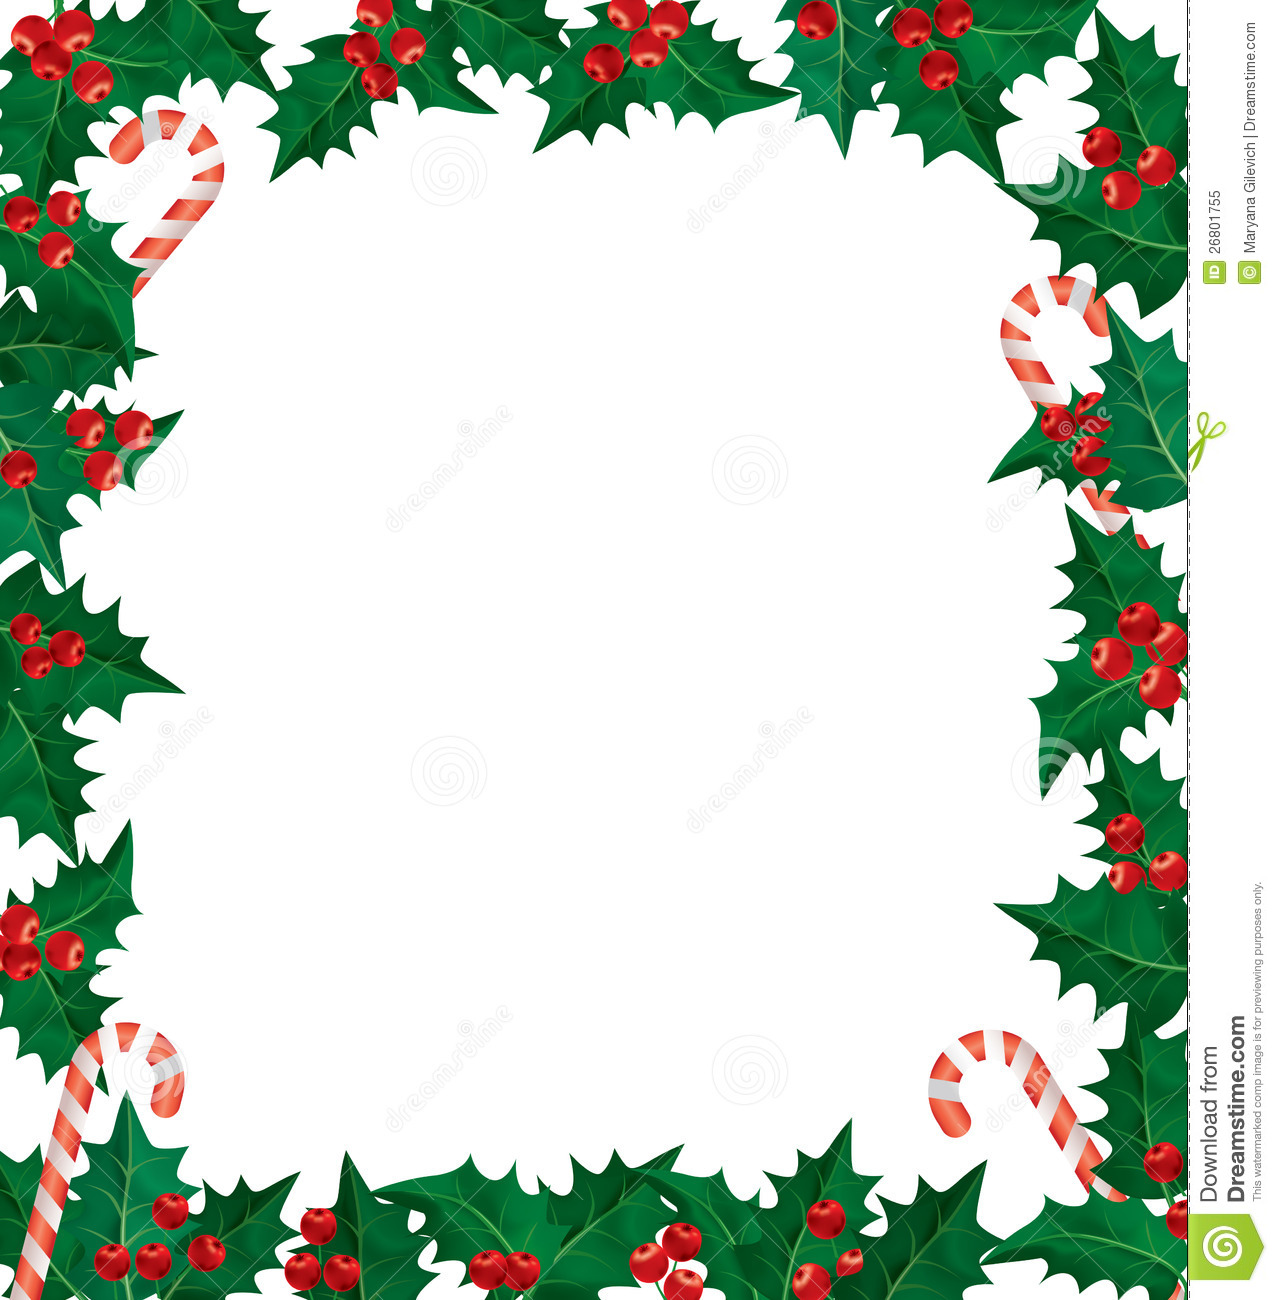 Berry clipart border, Berry border Transparent FREE for download on.